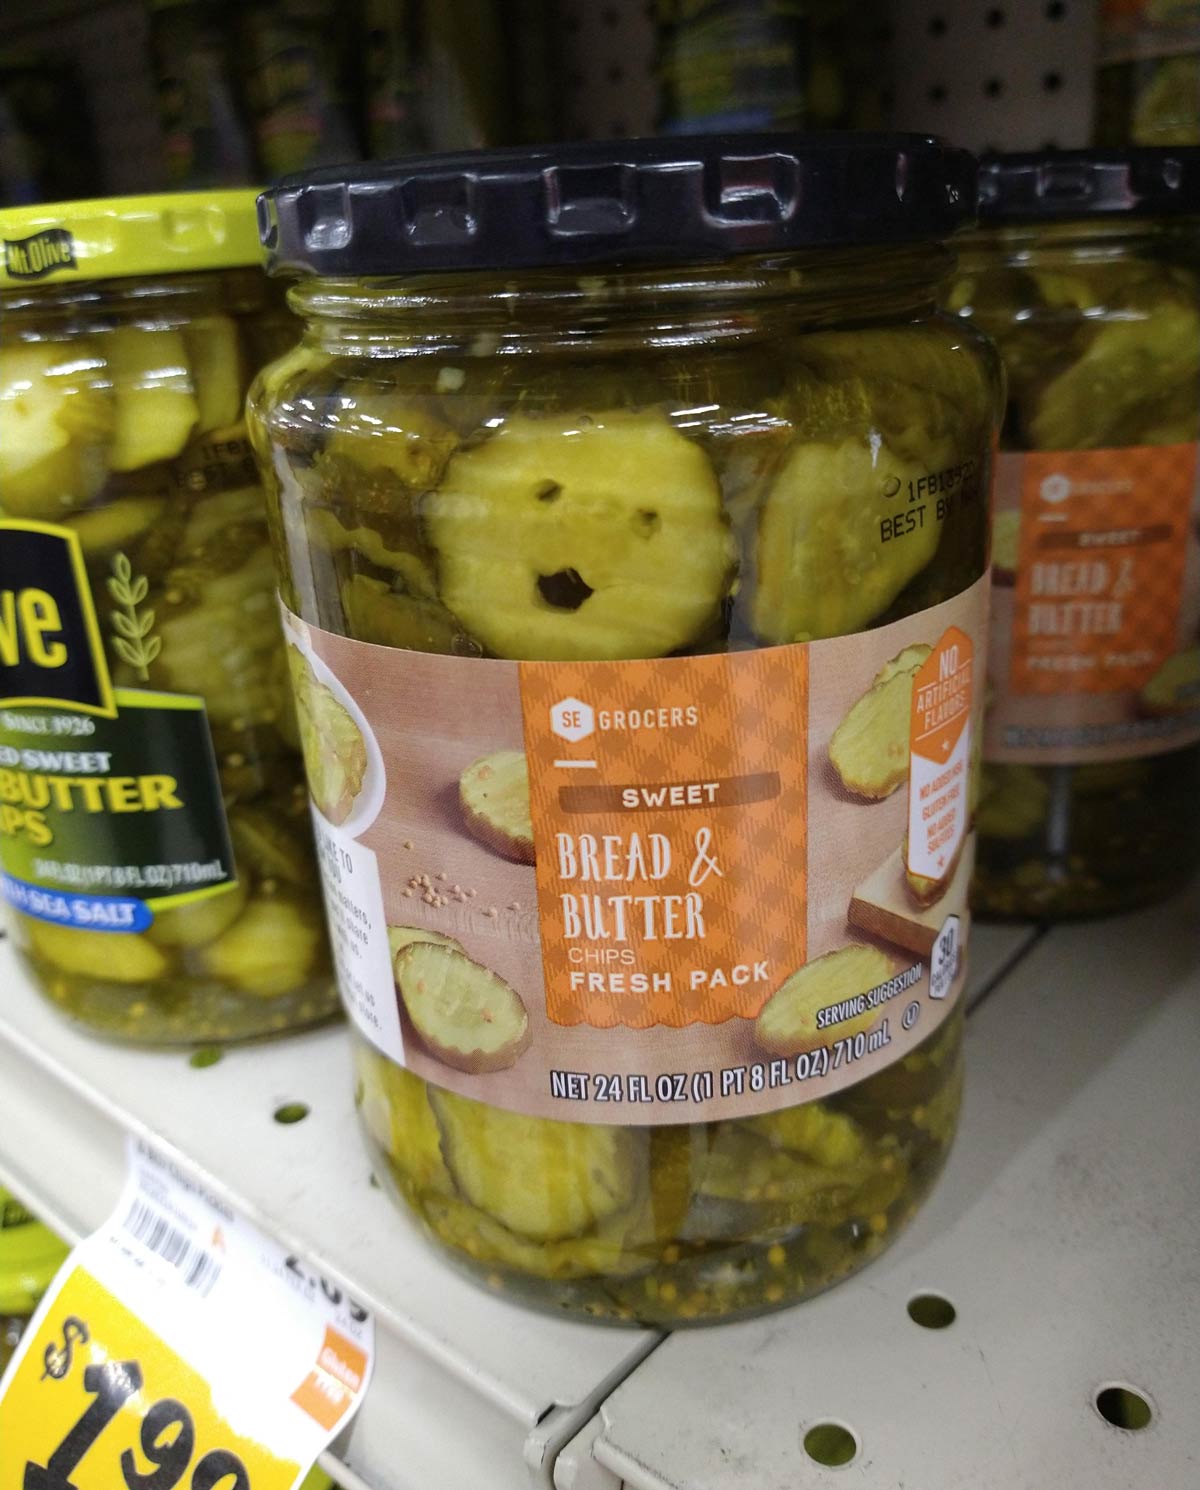 Found a very happy pickle at the store